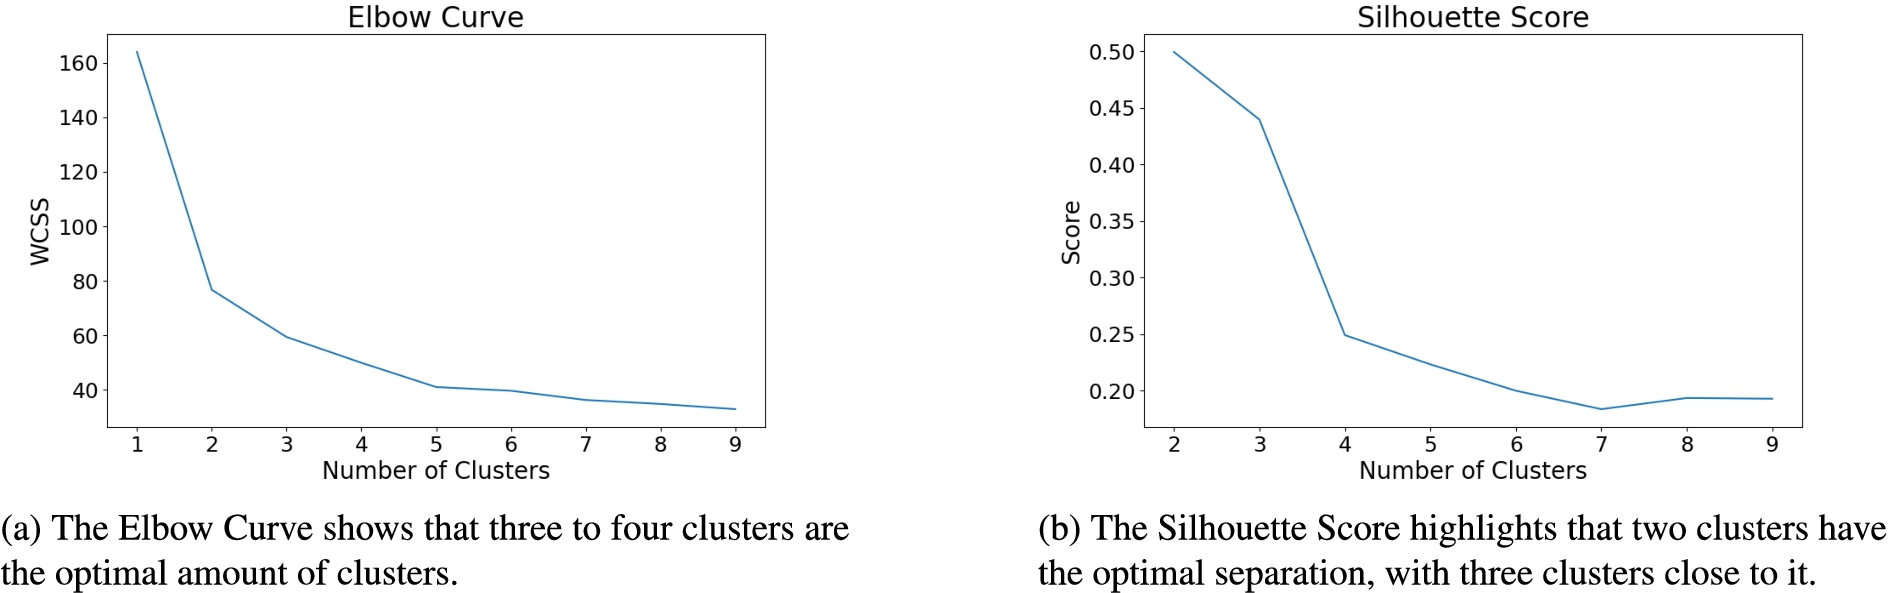 Comparing both methods, three clusters are selected as the optimal number of clusters.